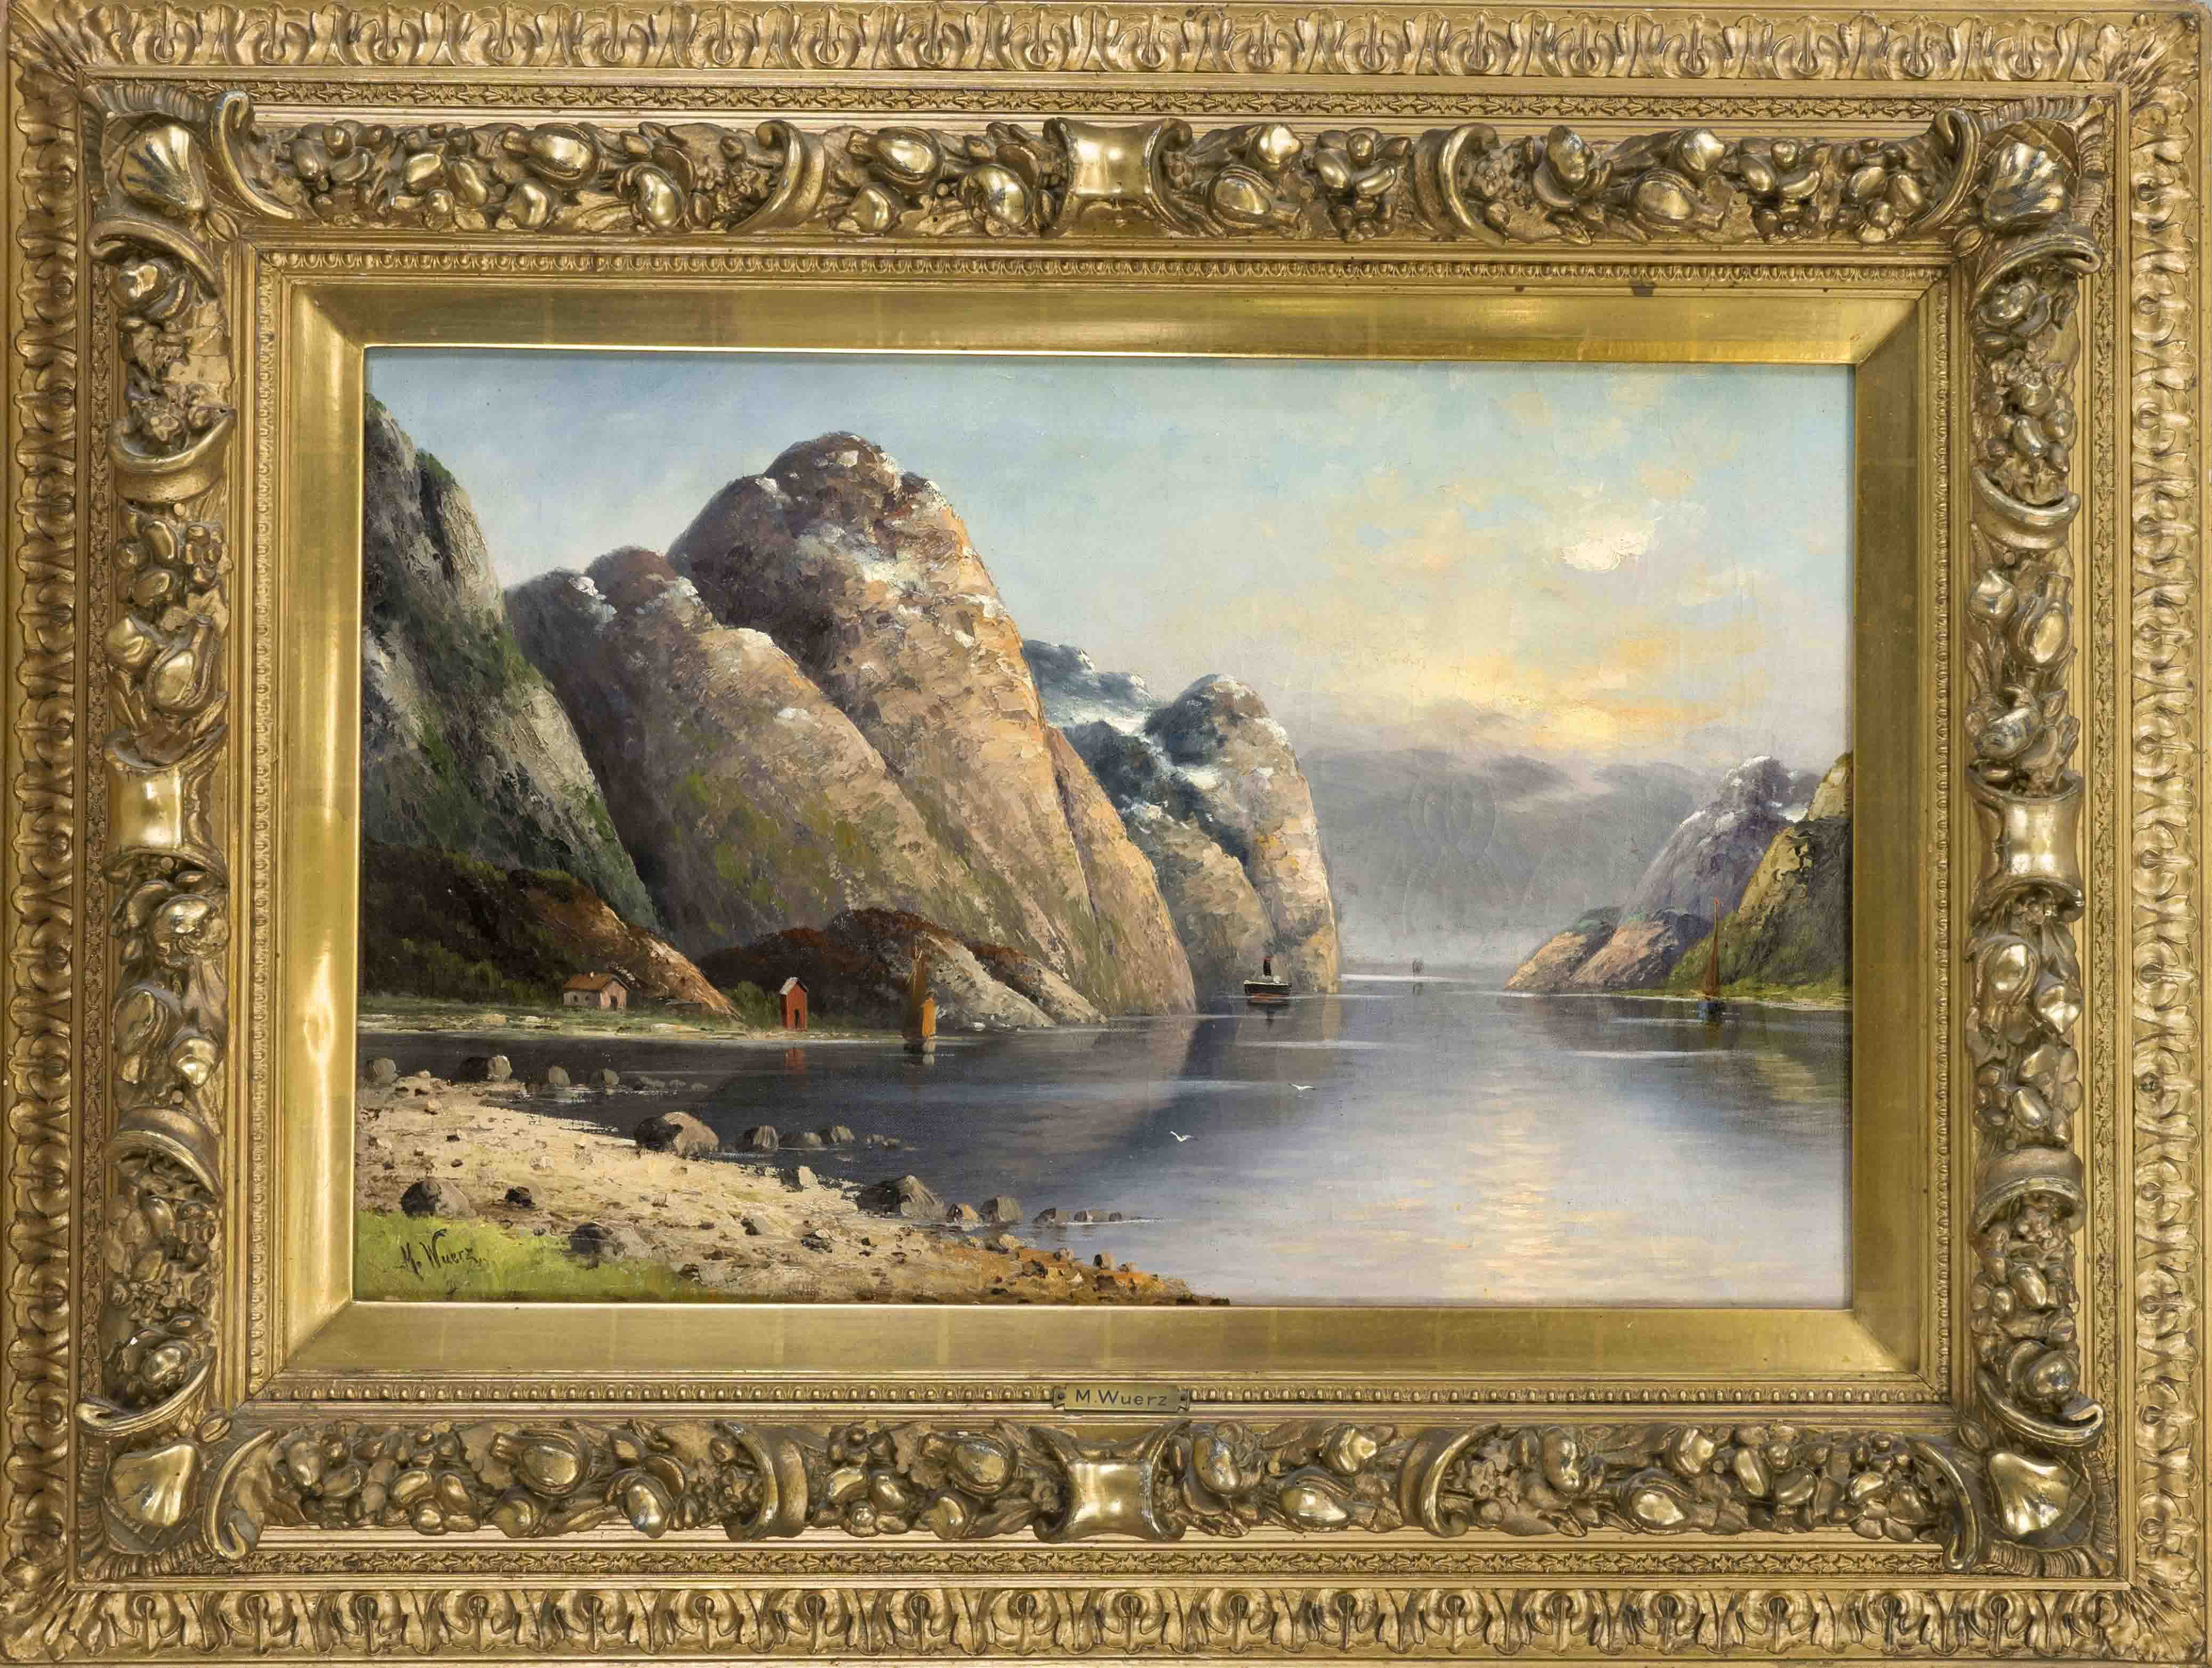 M. Wuerz, landscape painter late 19th century, View of a Norwegian fjord, oil on canvas, signed